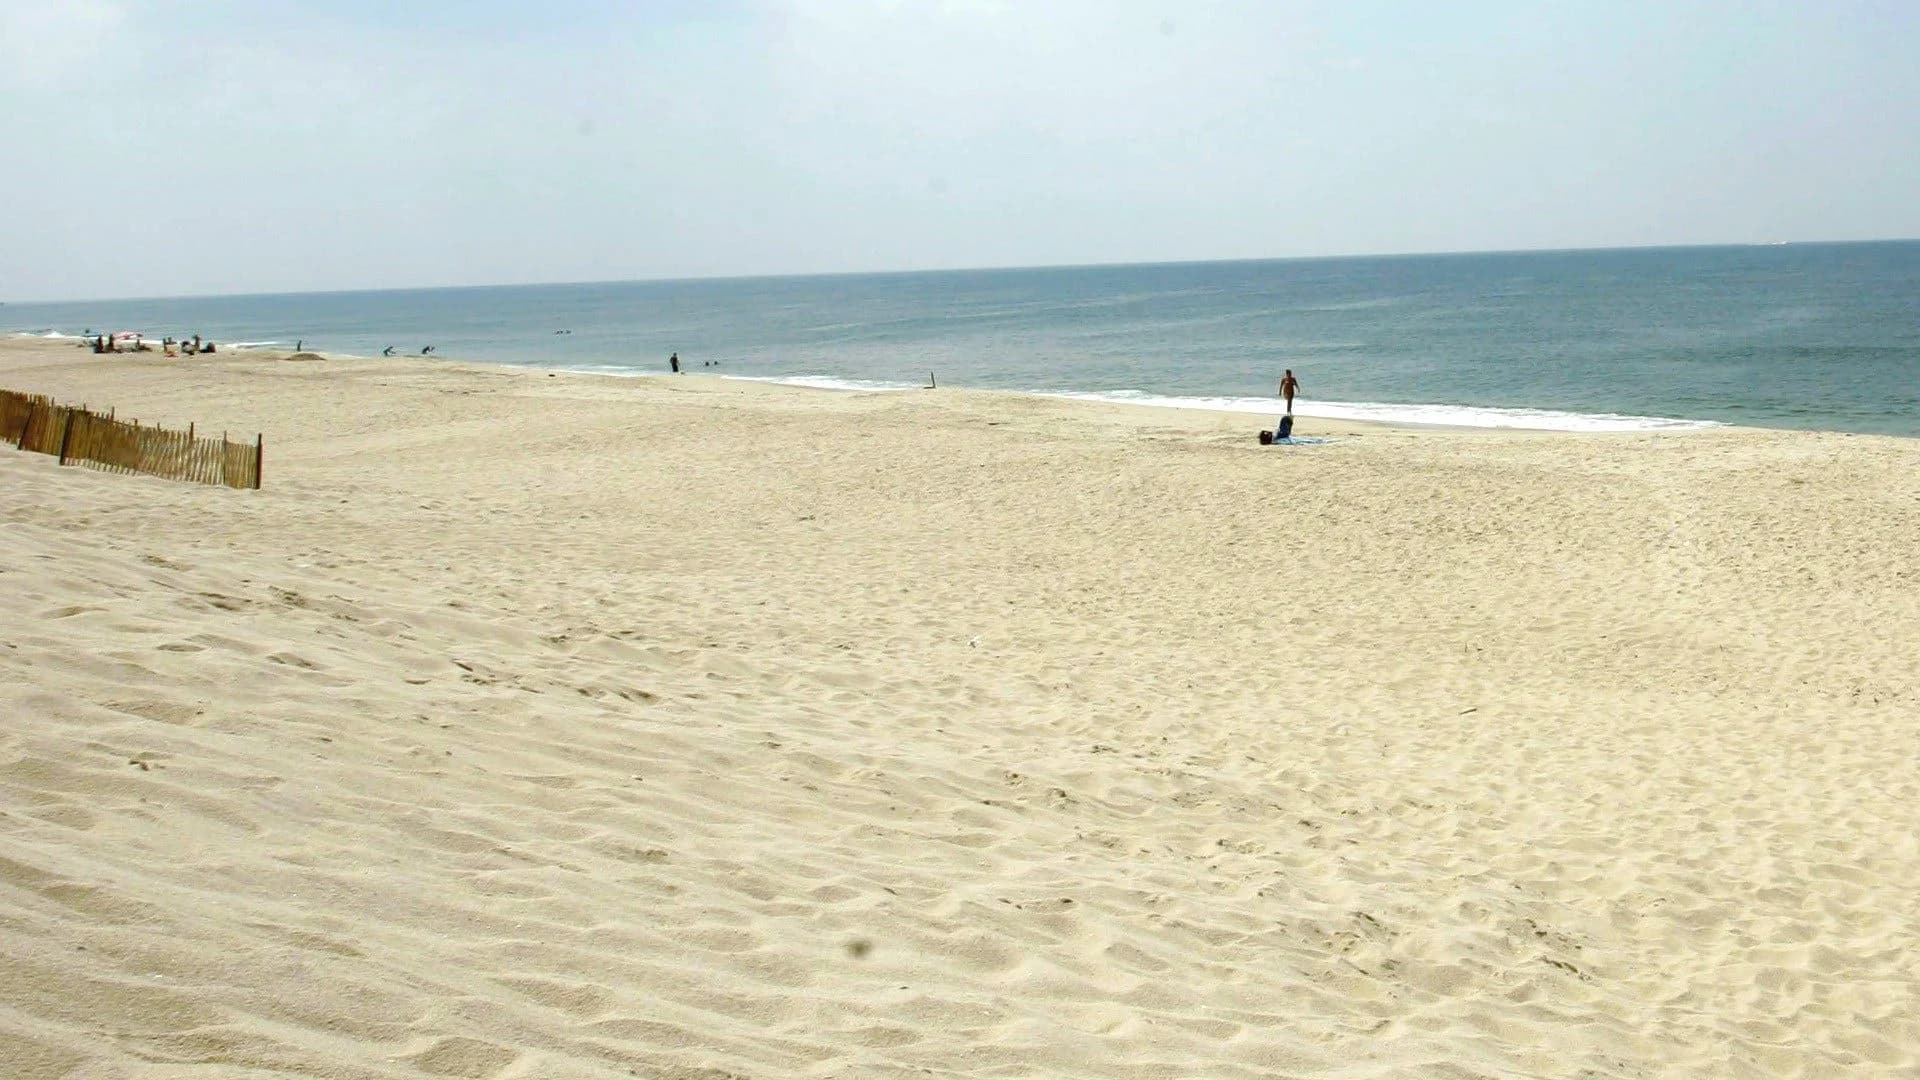 Man drowns in waters off Jersey Shore